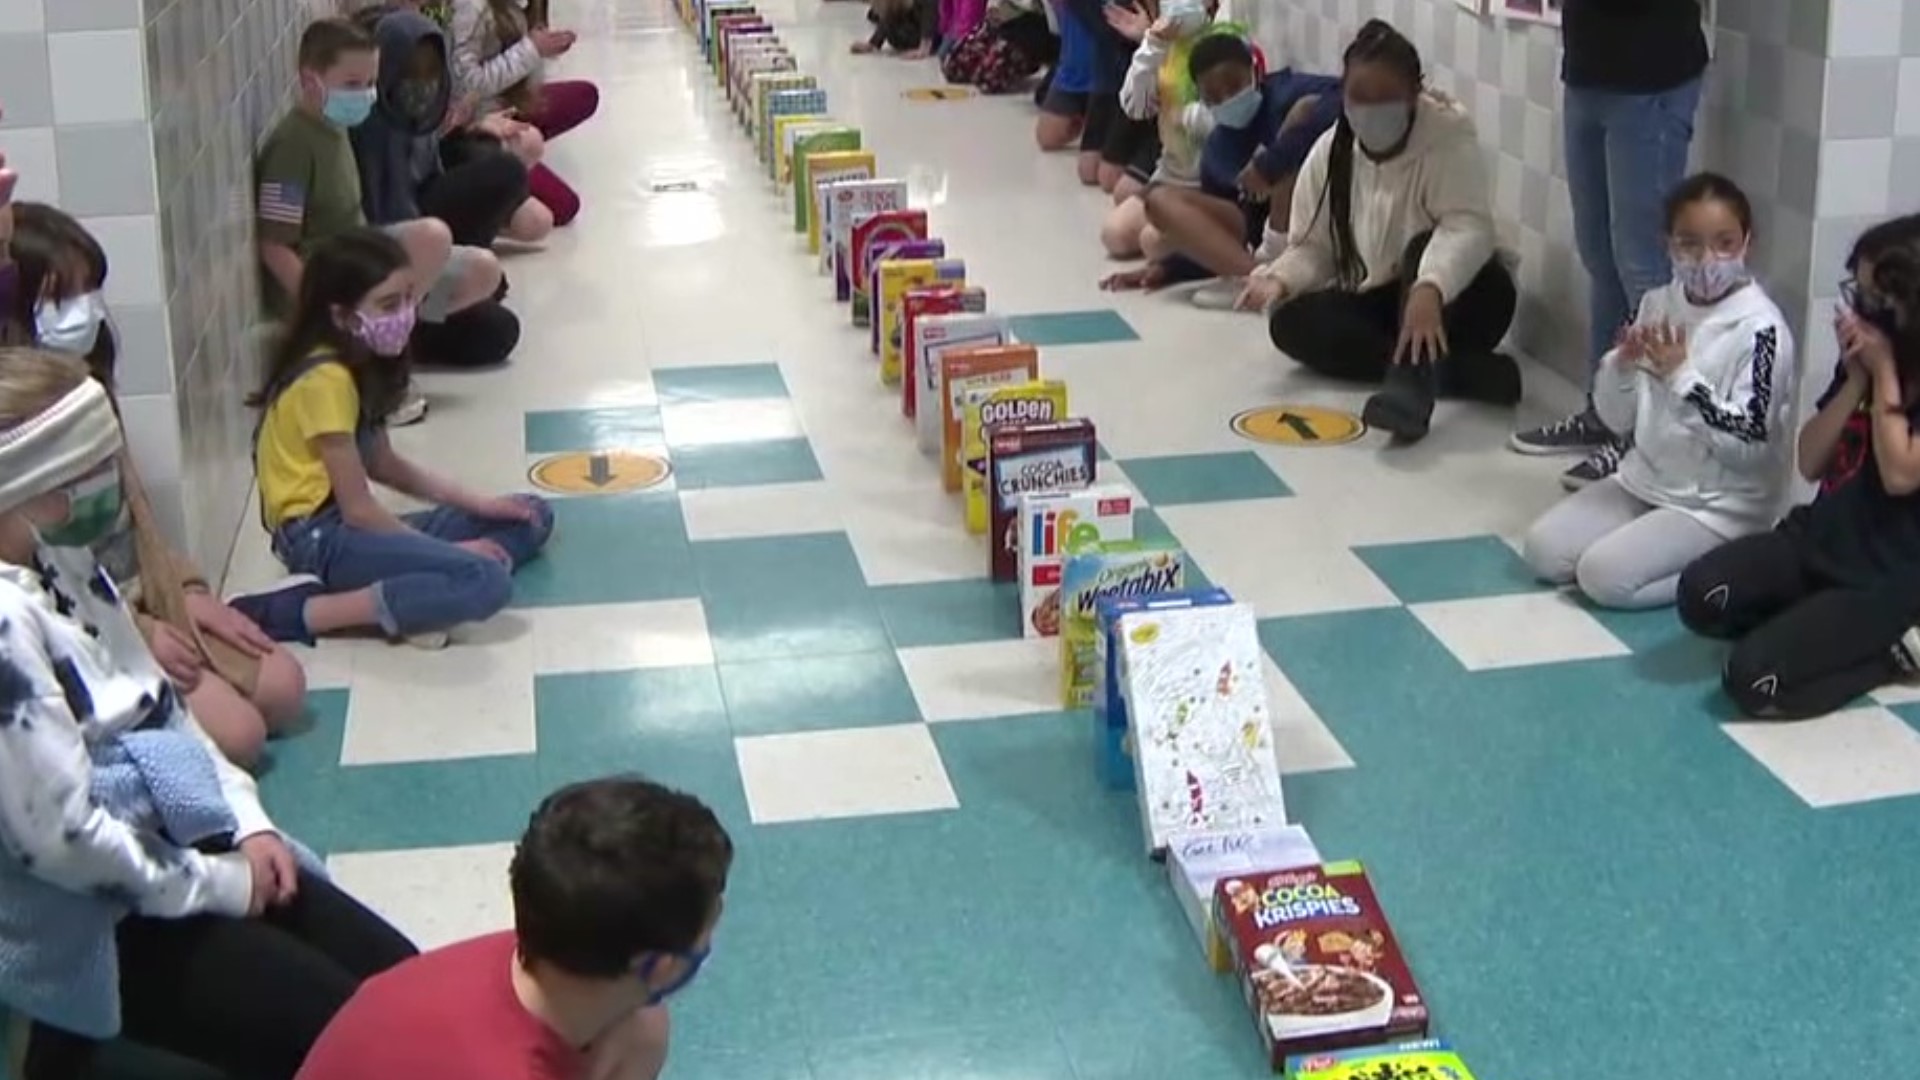 Some students in Union County had fun with a cereal box domino chain. Newswatch 16's Nikki Krize shows us how the project will help a nearby food pantry.